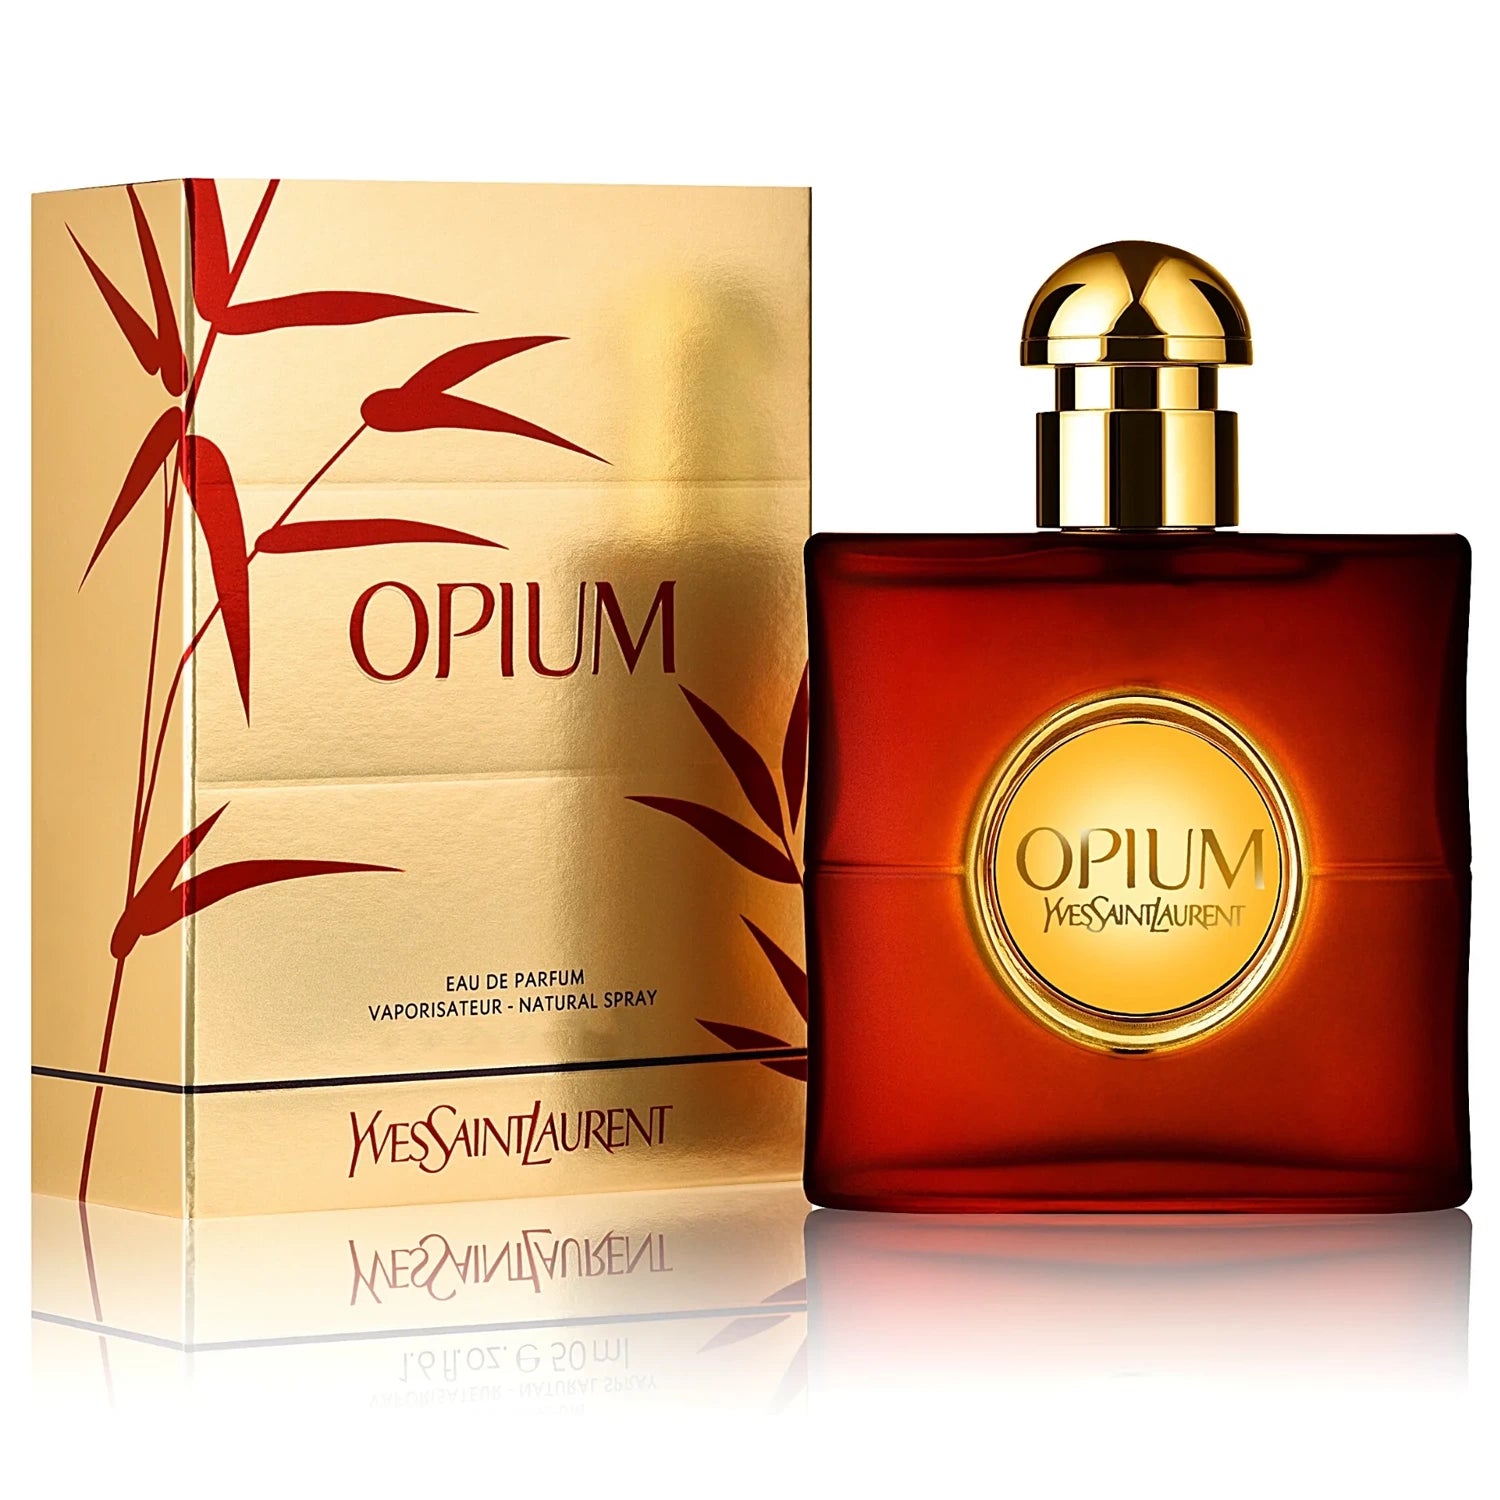 <span data-mce-fragment="1"><meta charset="UTF-8">
<b data-mce-fragment="1">Opium Eau de Parfum 2009</b> by <b data-mce-fragment="1">Yves Saint Laurent</b> is a Amber Spicy fragrance for women. <b data-mce-fragment="1">Opium Eau de Parfum 2009</b> was launched in 2009. Top notes are Mandarin Orange, Bergamot and Lily-of-the-Valley; middle notes are Myrhh and Jasmine; base notes are Opoponax, Amber, Patchouli and Vanille. A flowery and voluptuous character with a rich, amber and spicy structure.</span>